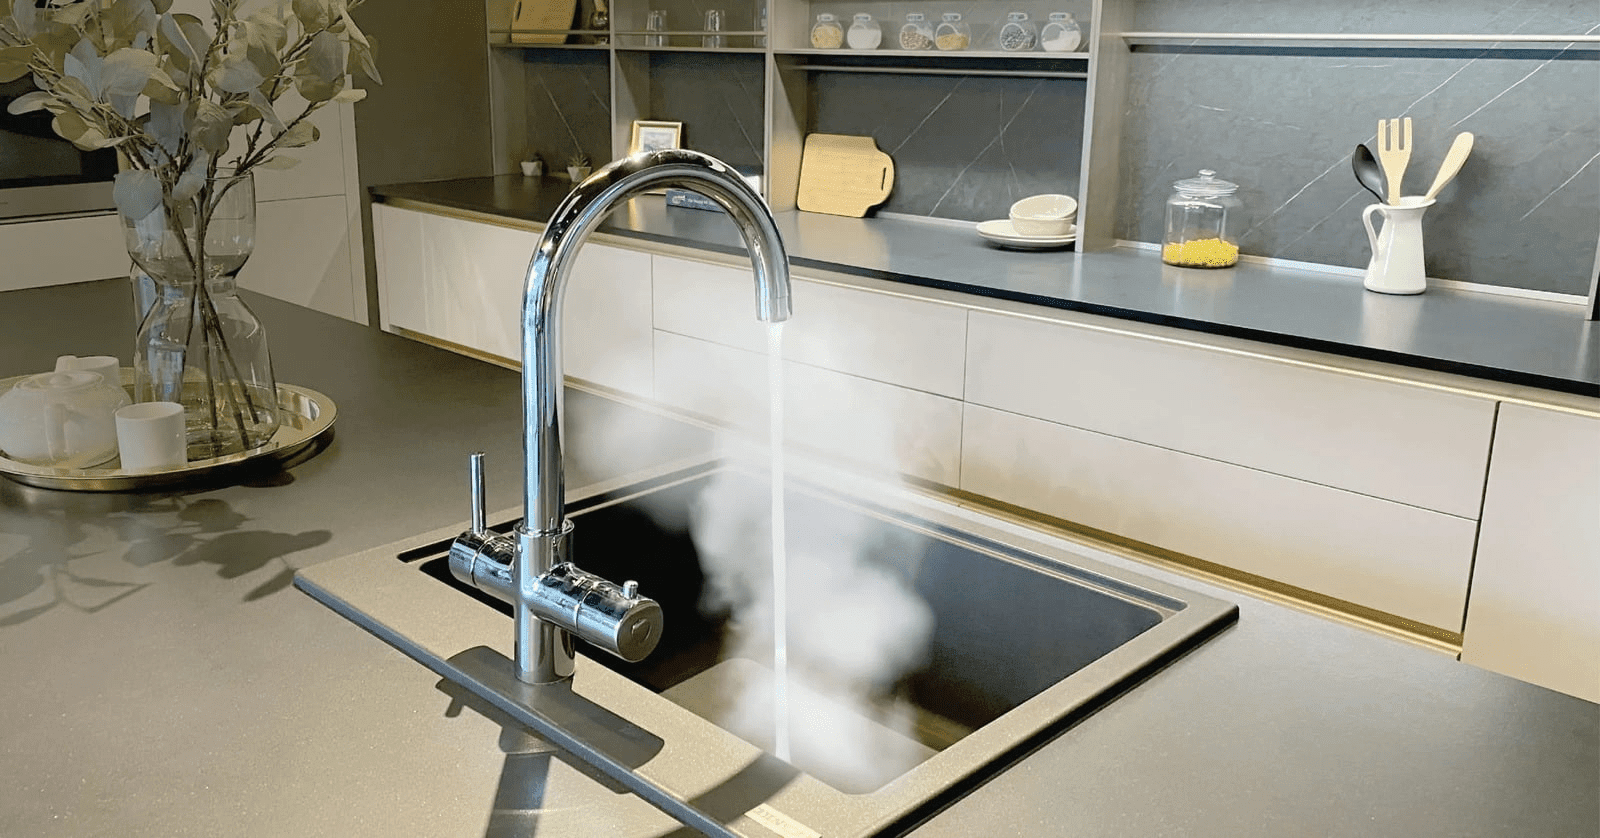 A Intrix boiling water tap installed in a kitchen.